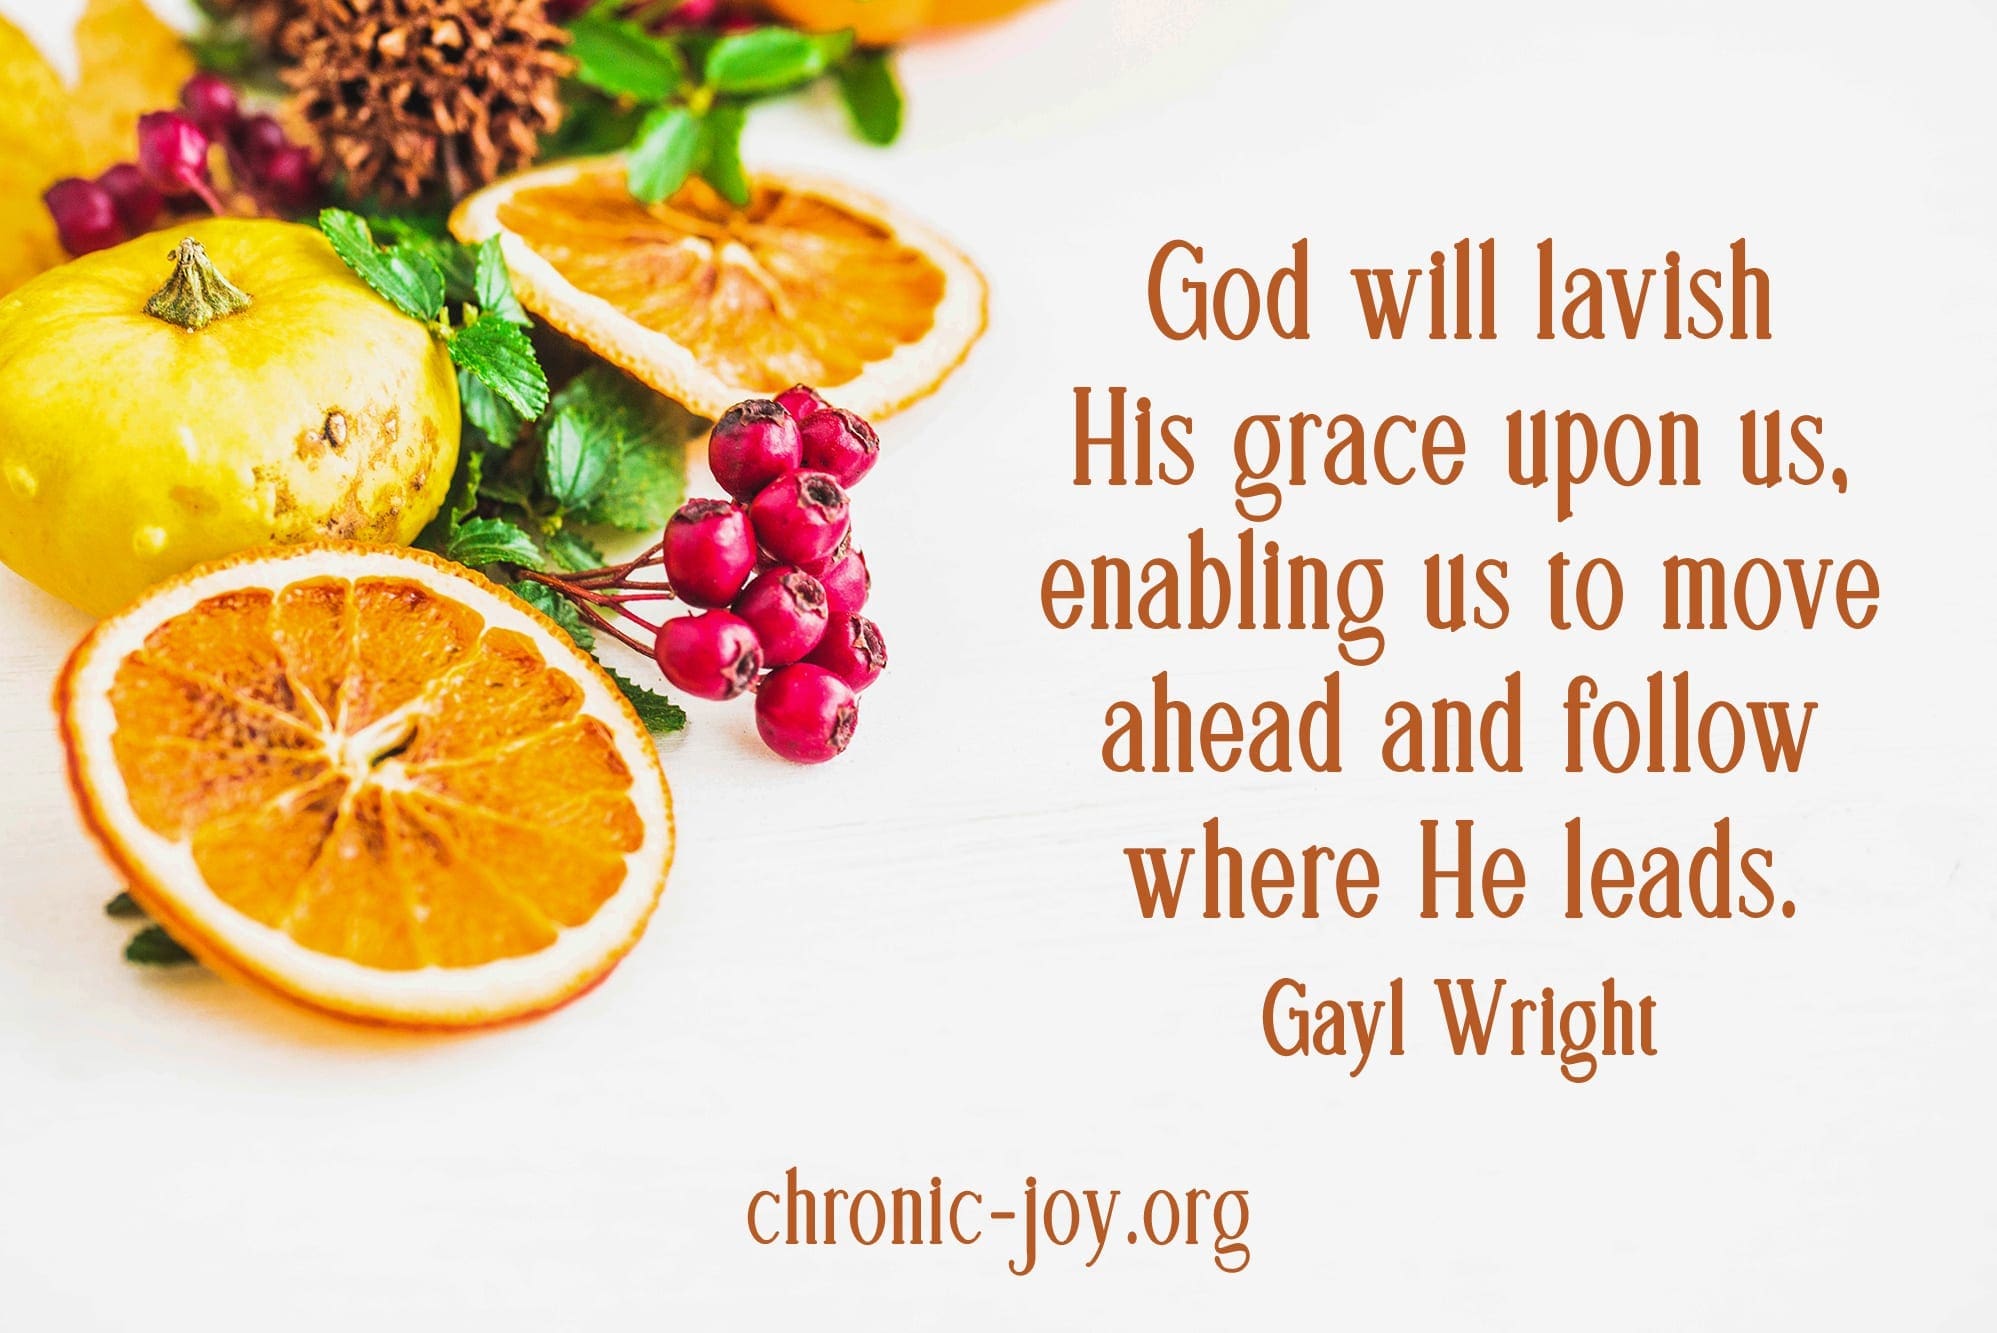 "God will lavish His grace upon us, enabling us to move ahead and follow where He leads." Gayl Wright